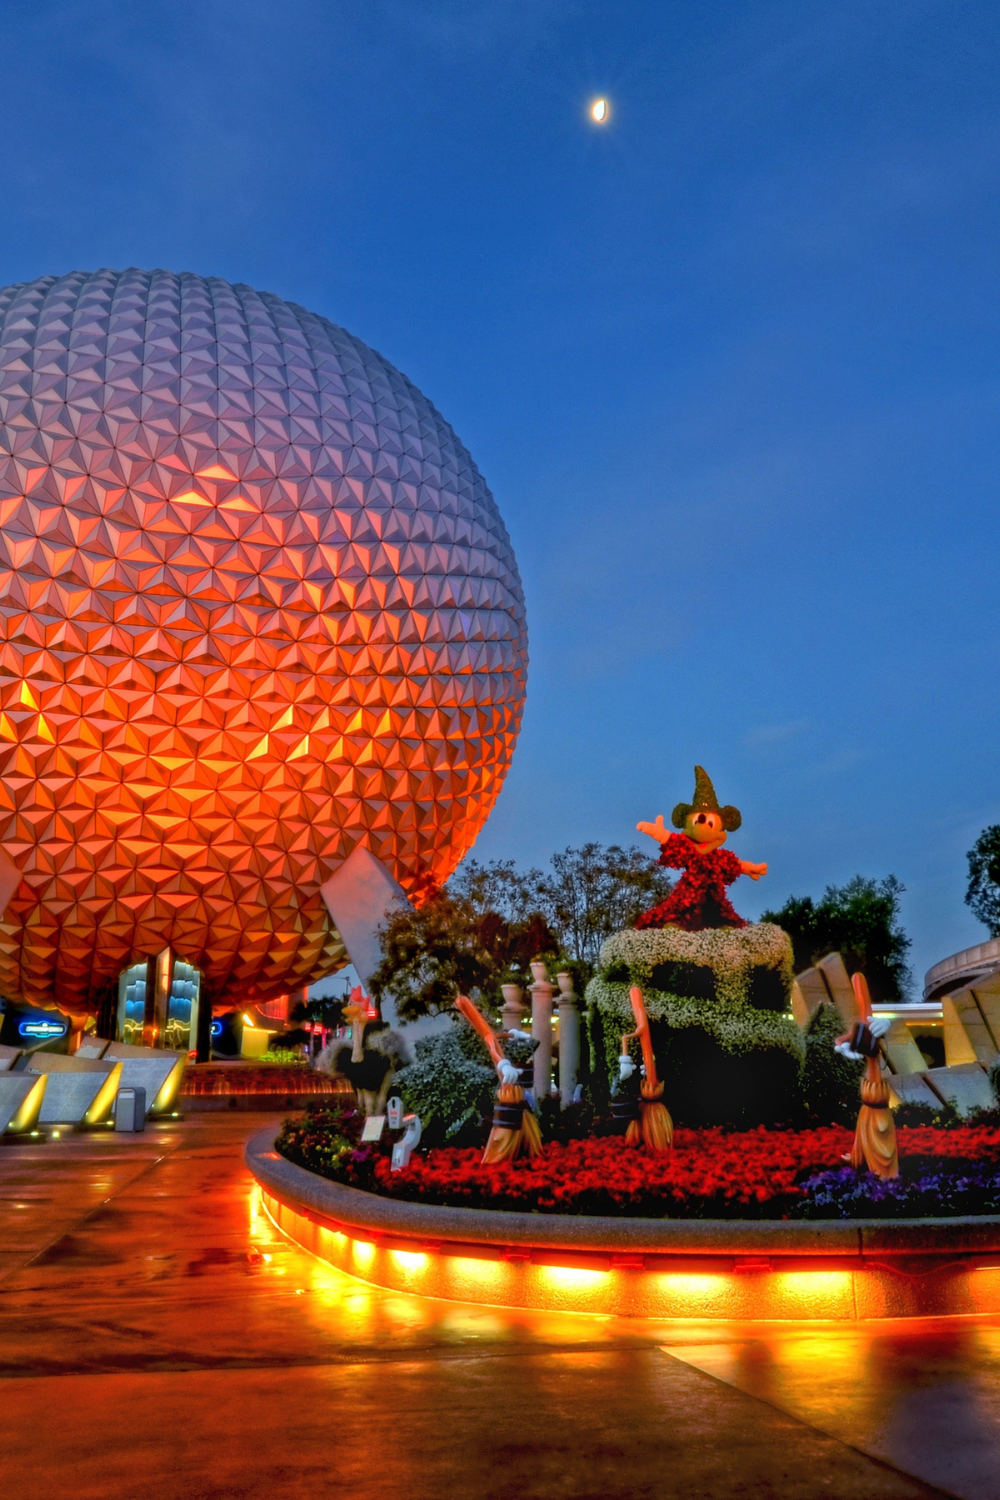 Cover image for blog post on Epcot Instagram captions - it features a evening shot of Epcot